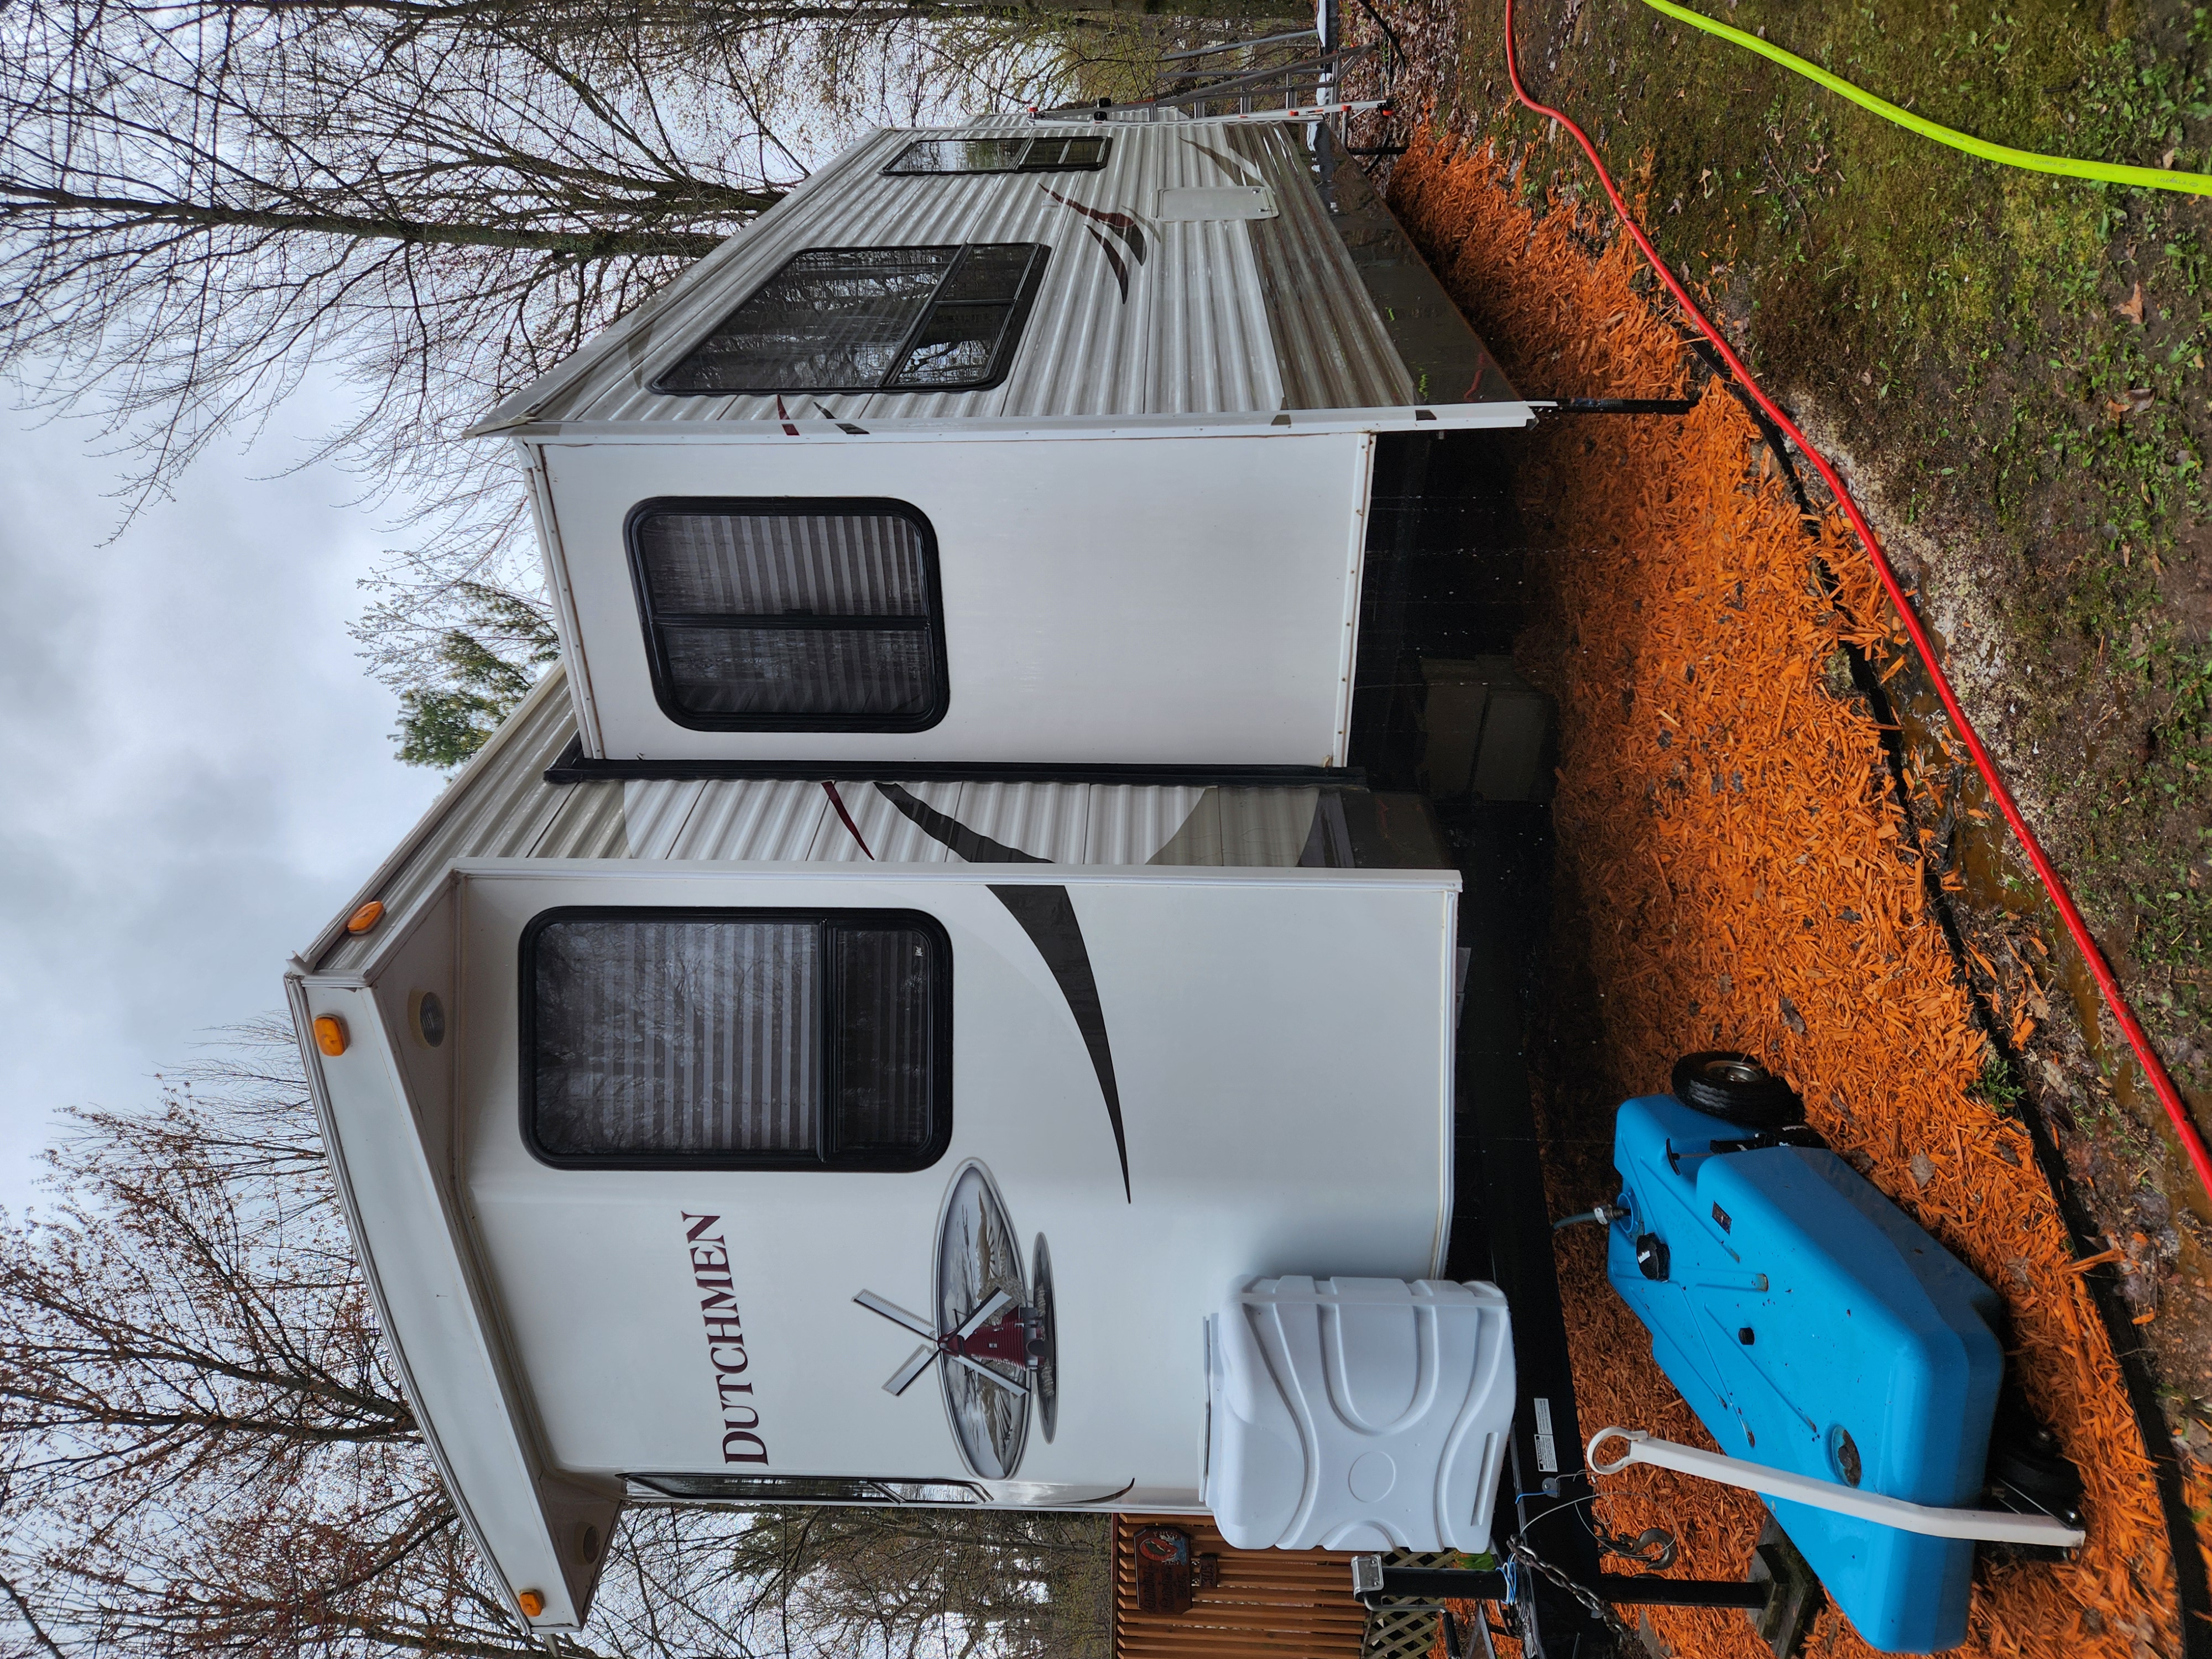 Seasonal RV Cleaning, Patio Cleaning, and Camper Washing at O'Neil Creek Campground in Chippewa Falls, WI